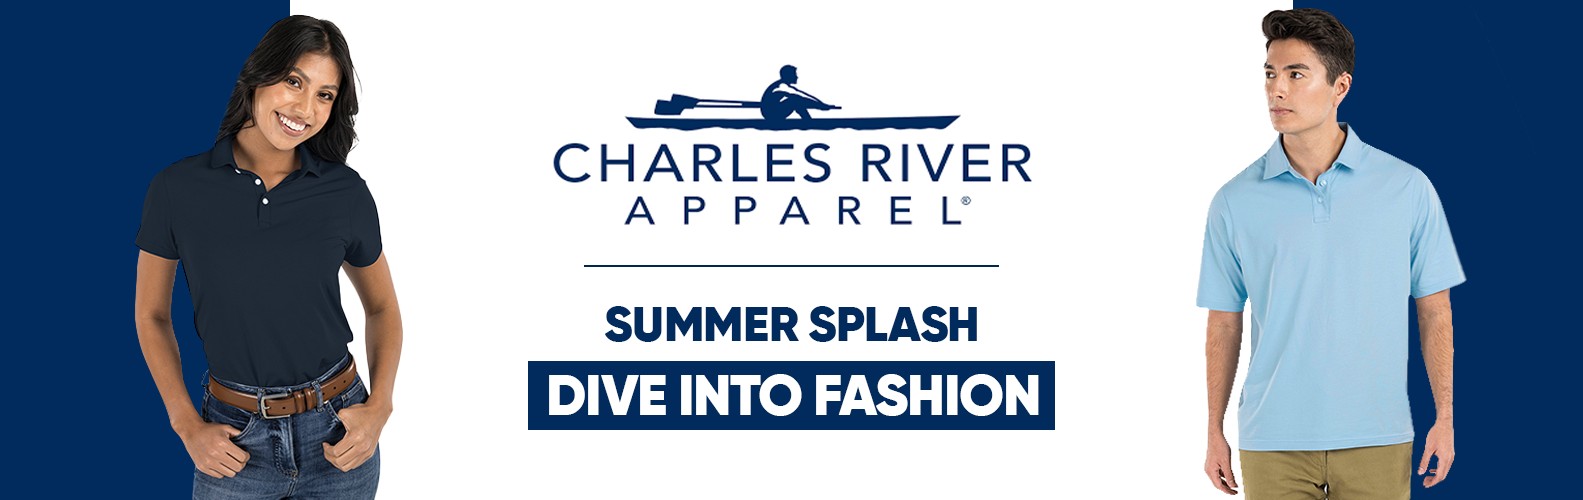 Charless River for Summer